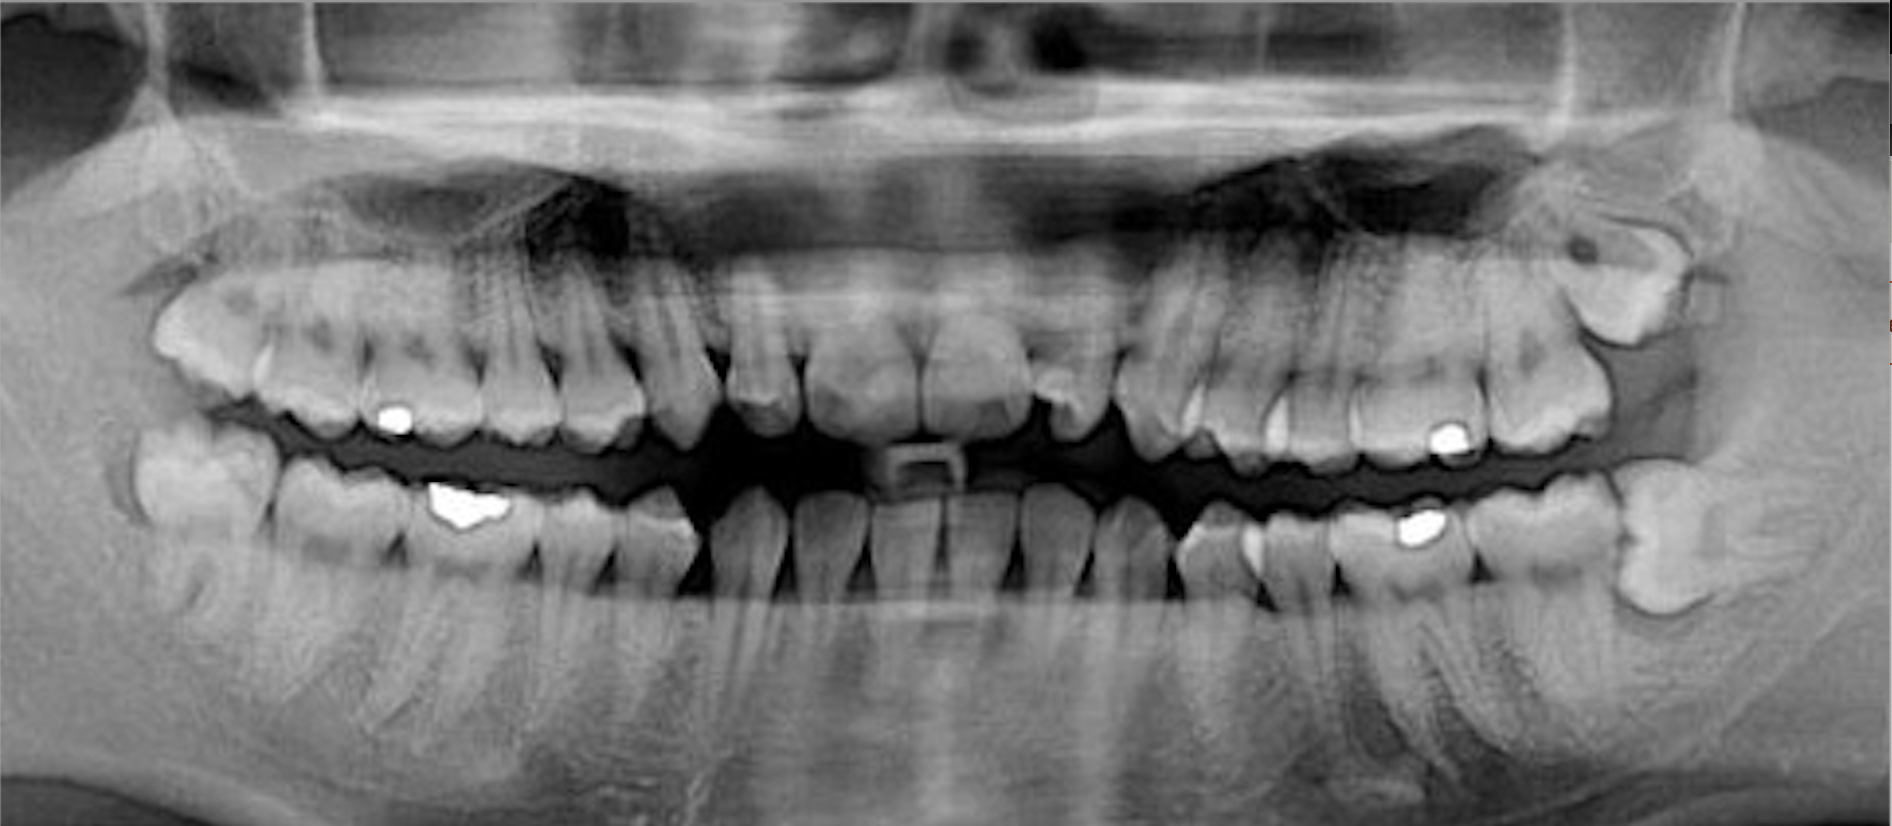 X-ray of upper and lower teeth with glowing spots representing cavities.